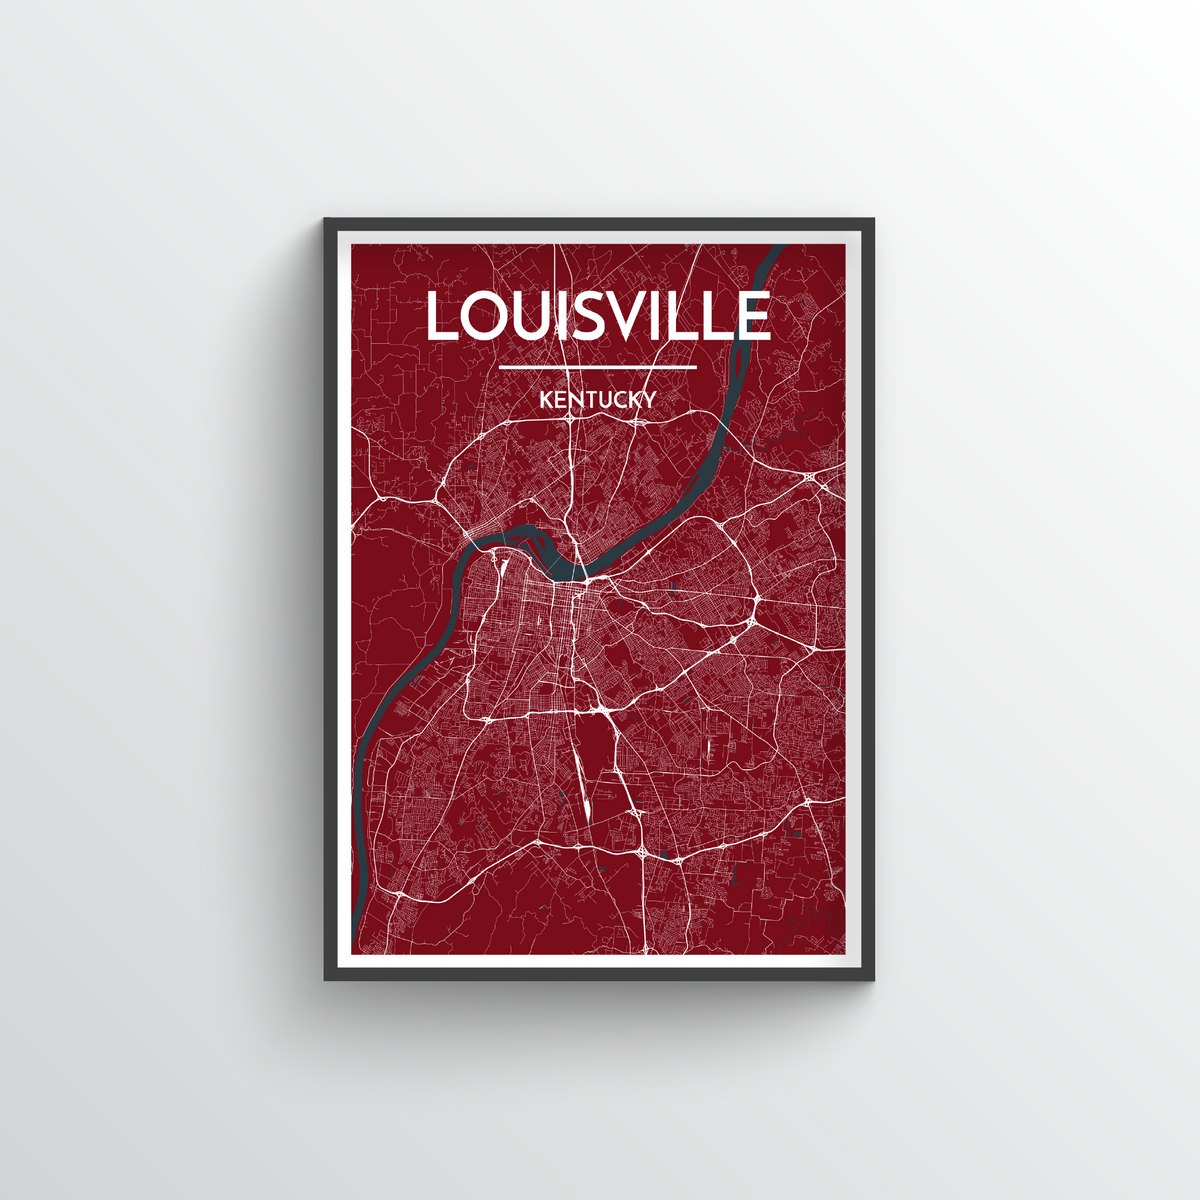 Florence Kentucky City Map Founded 1830 University of Louisville Color  Palette iPhone 8 Plus Case by Design Turnpike - Instaprints